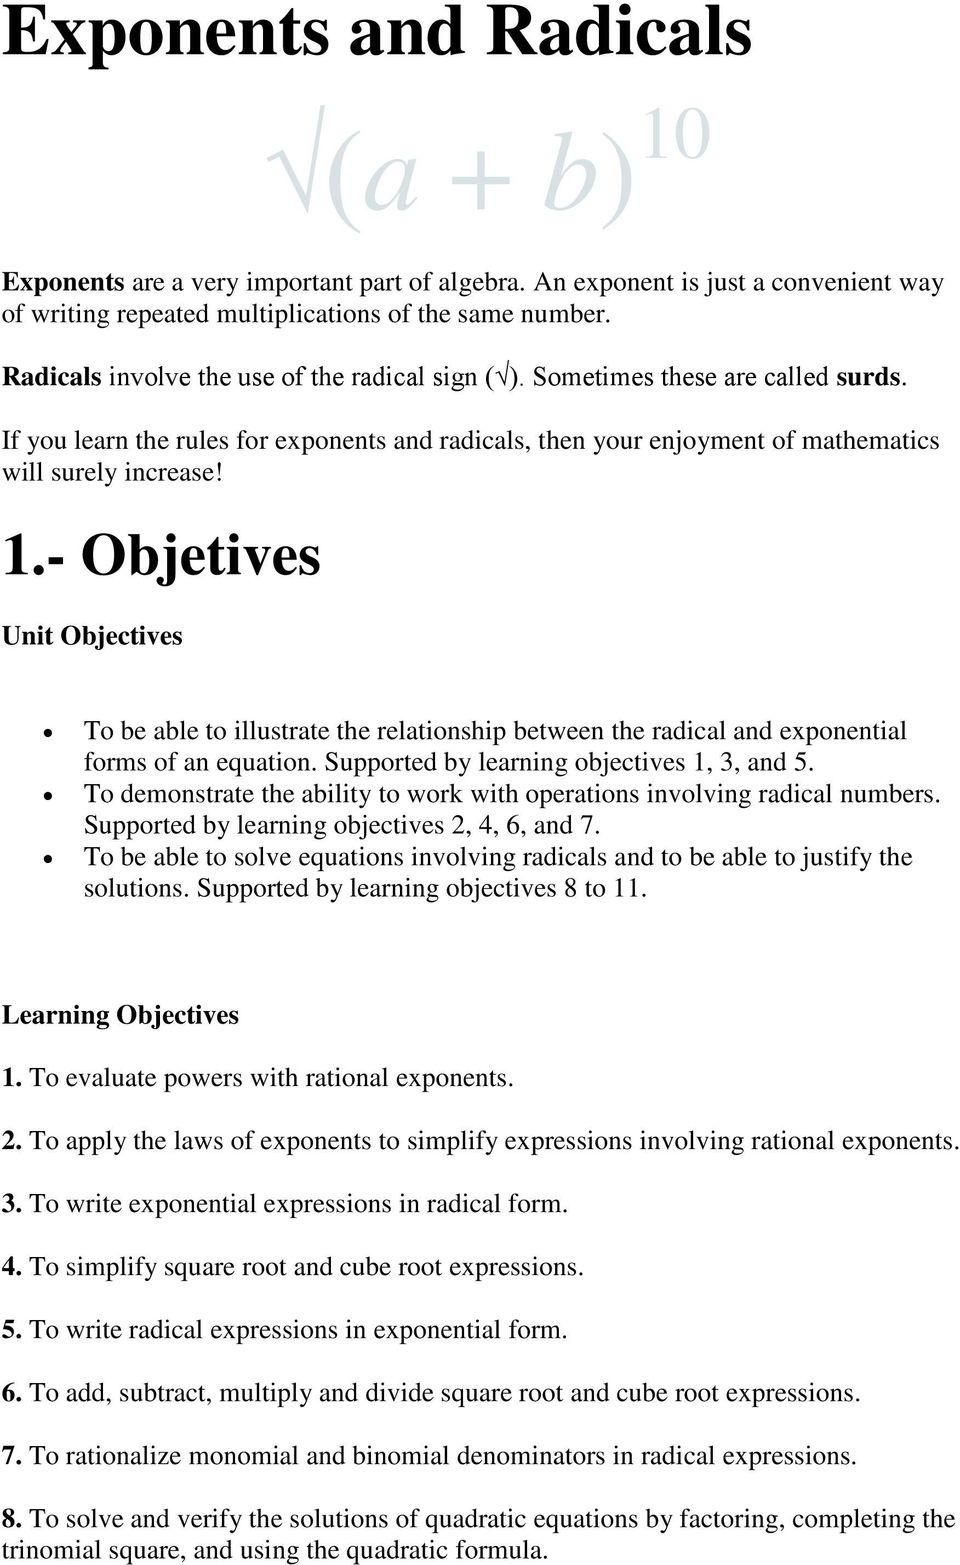 - Objetives Unit Objectives To be able to illustrate the relationship between the radical and exponential forms of an equation. Supported by learning objectives 1, 3, and 5.